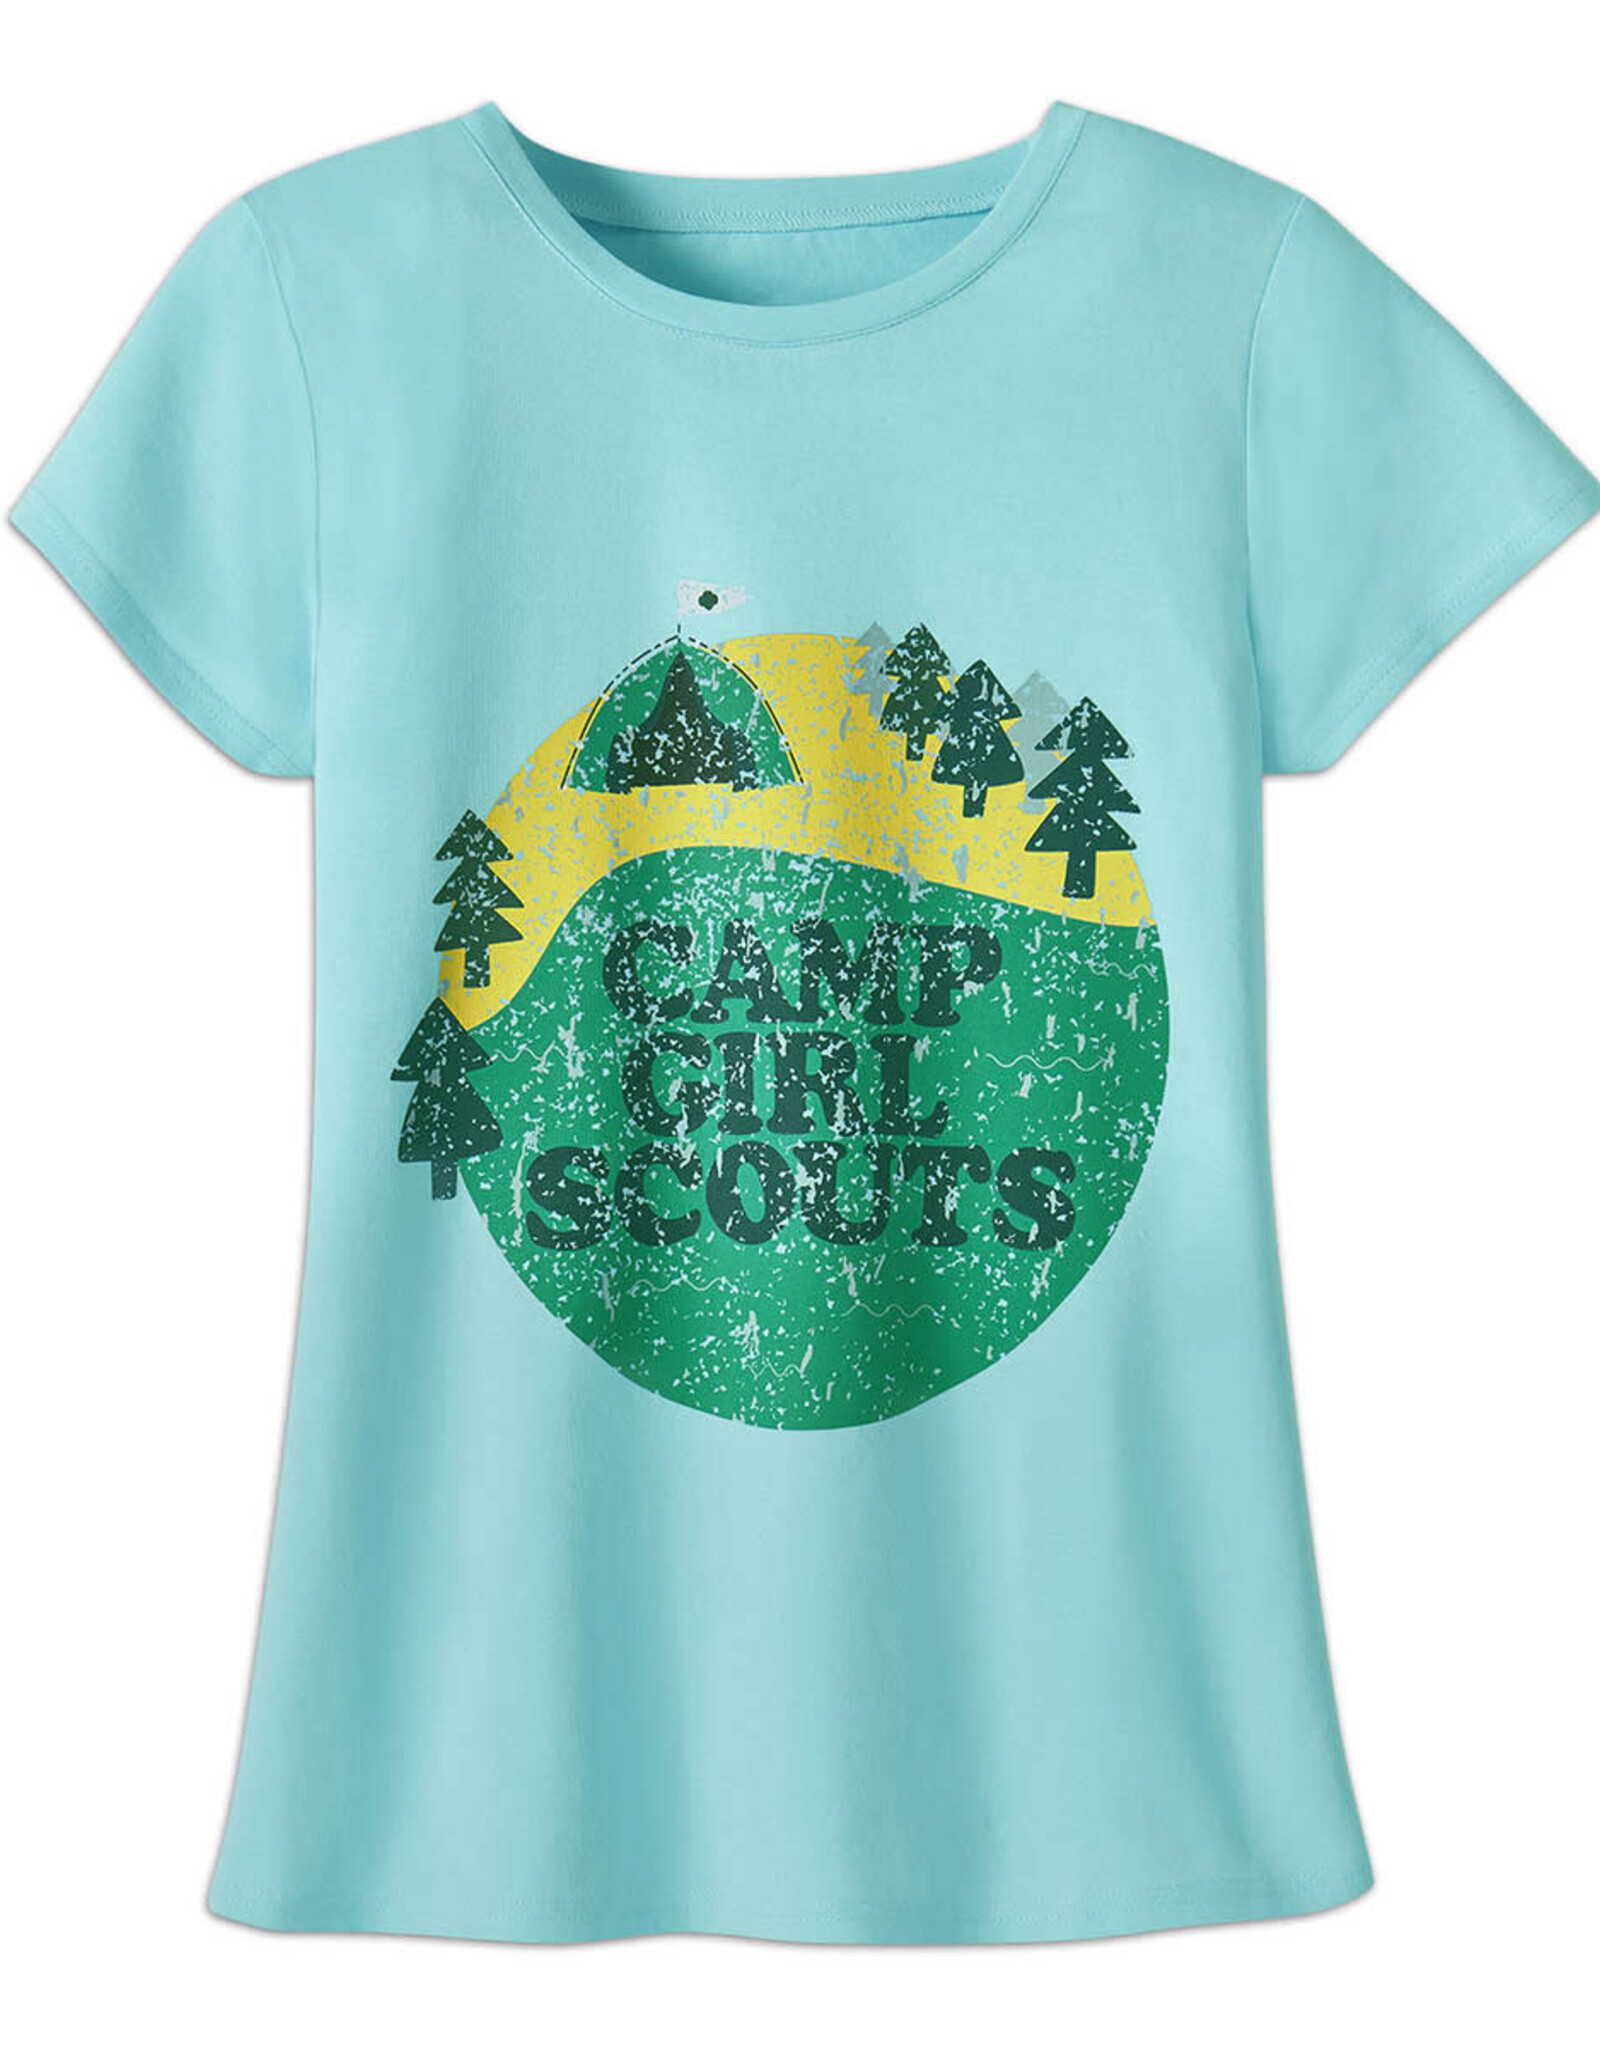 GIRL SCOUTS OF THE USA ! Camp Girl Scouts T-Shirt